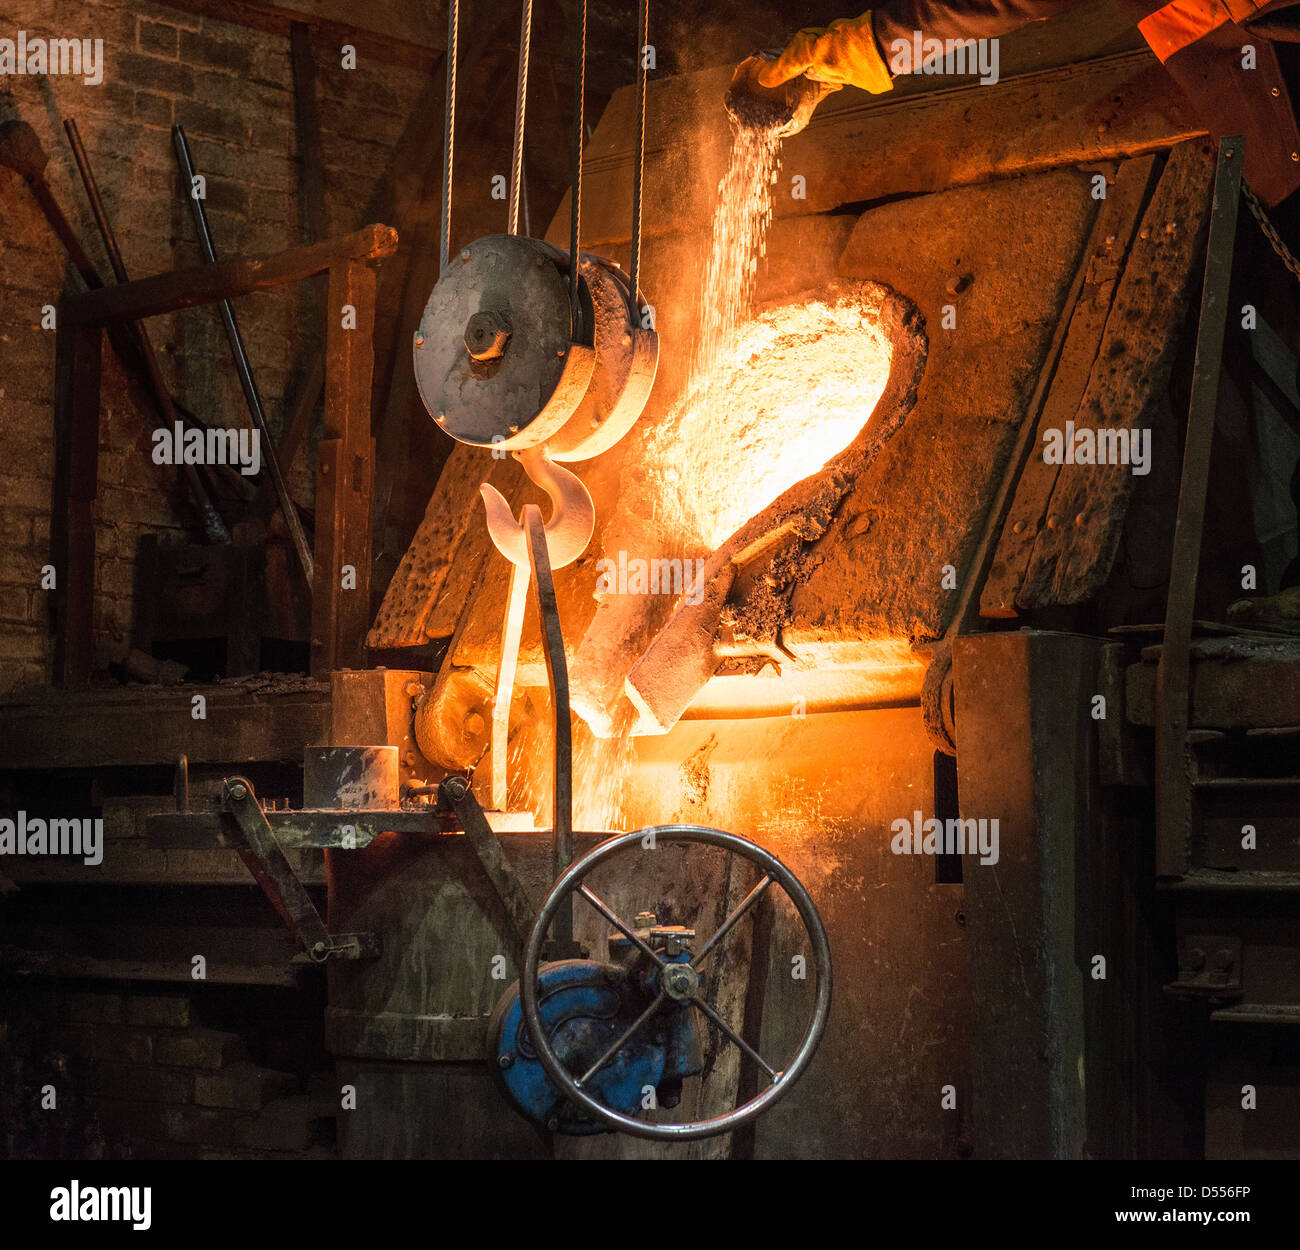 Molten metal pouring in foundry Stock Photo